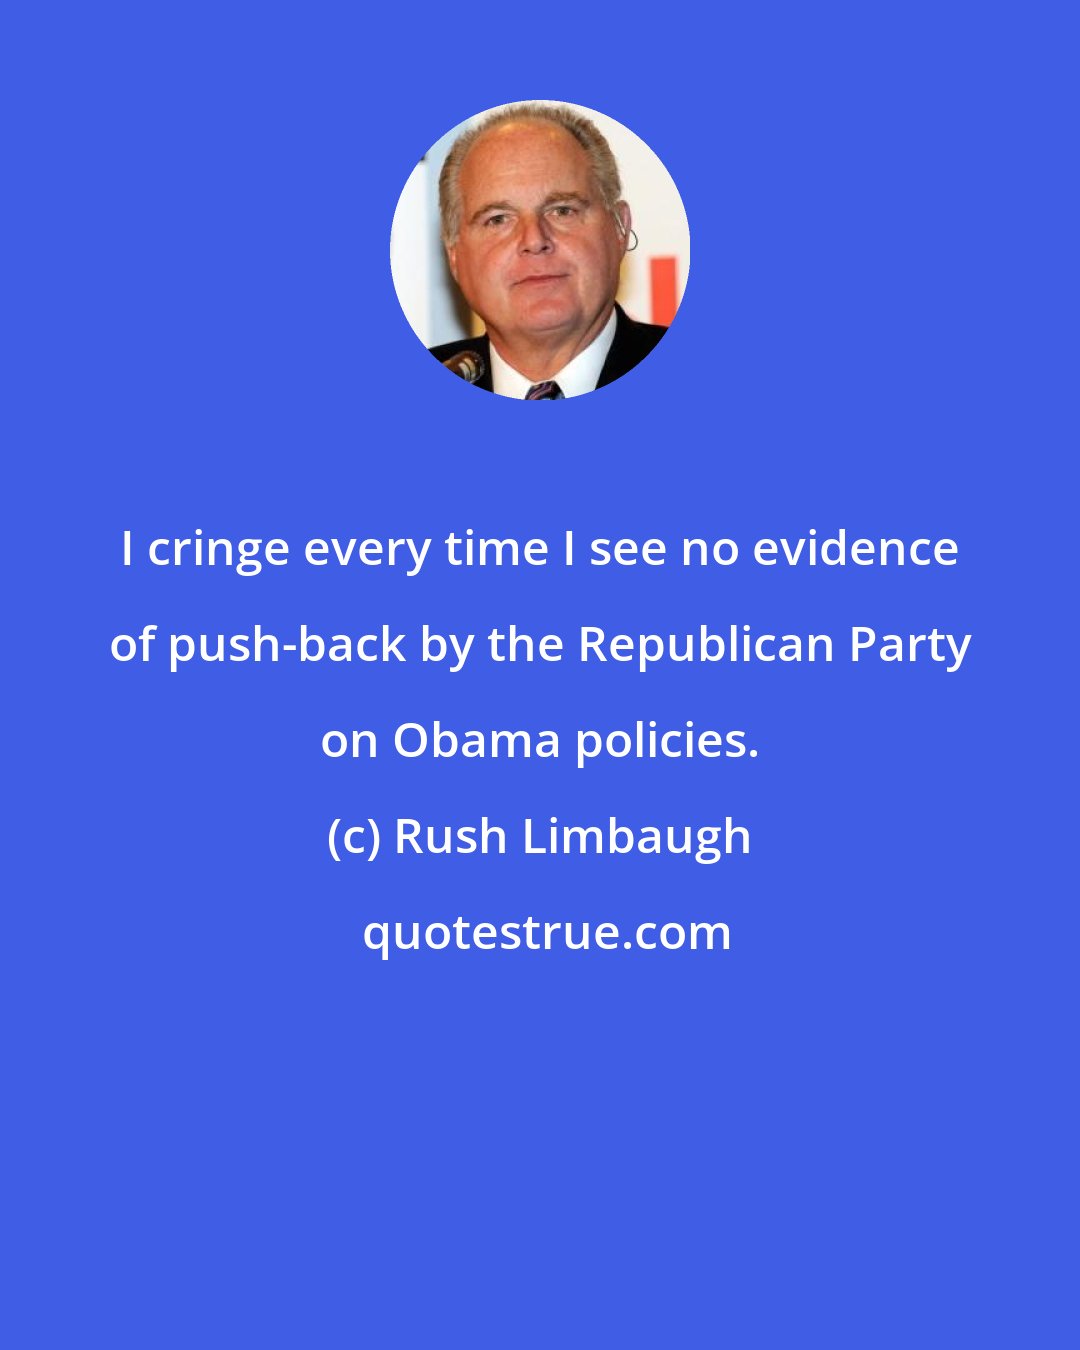 Rush Limbaugh: I cringe every time I see no evidence of push-back by the Republican Party on Obama policies.